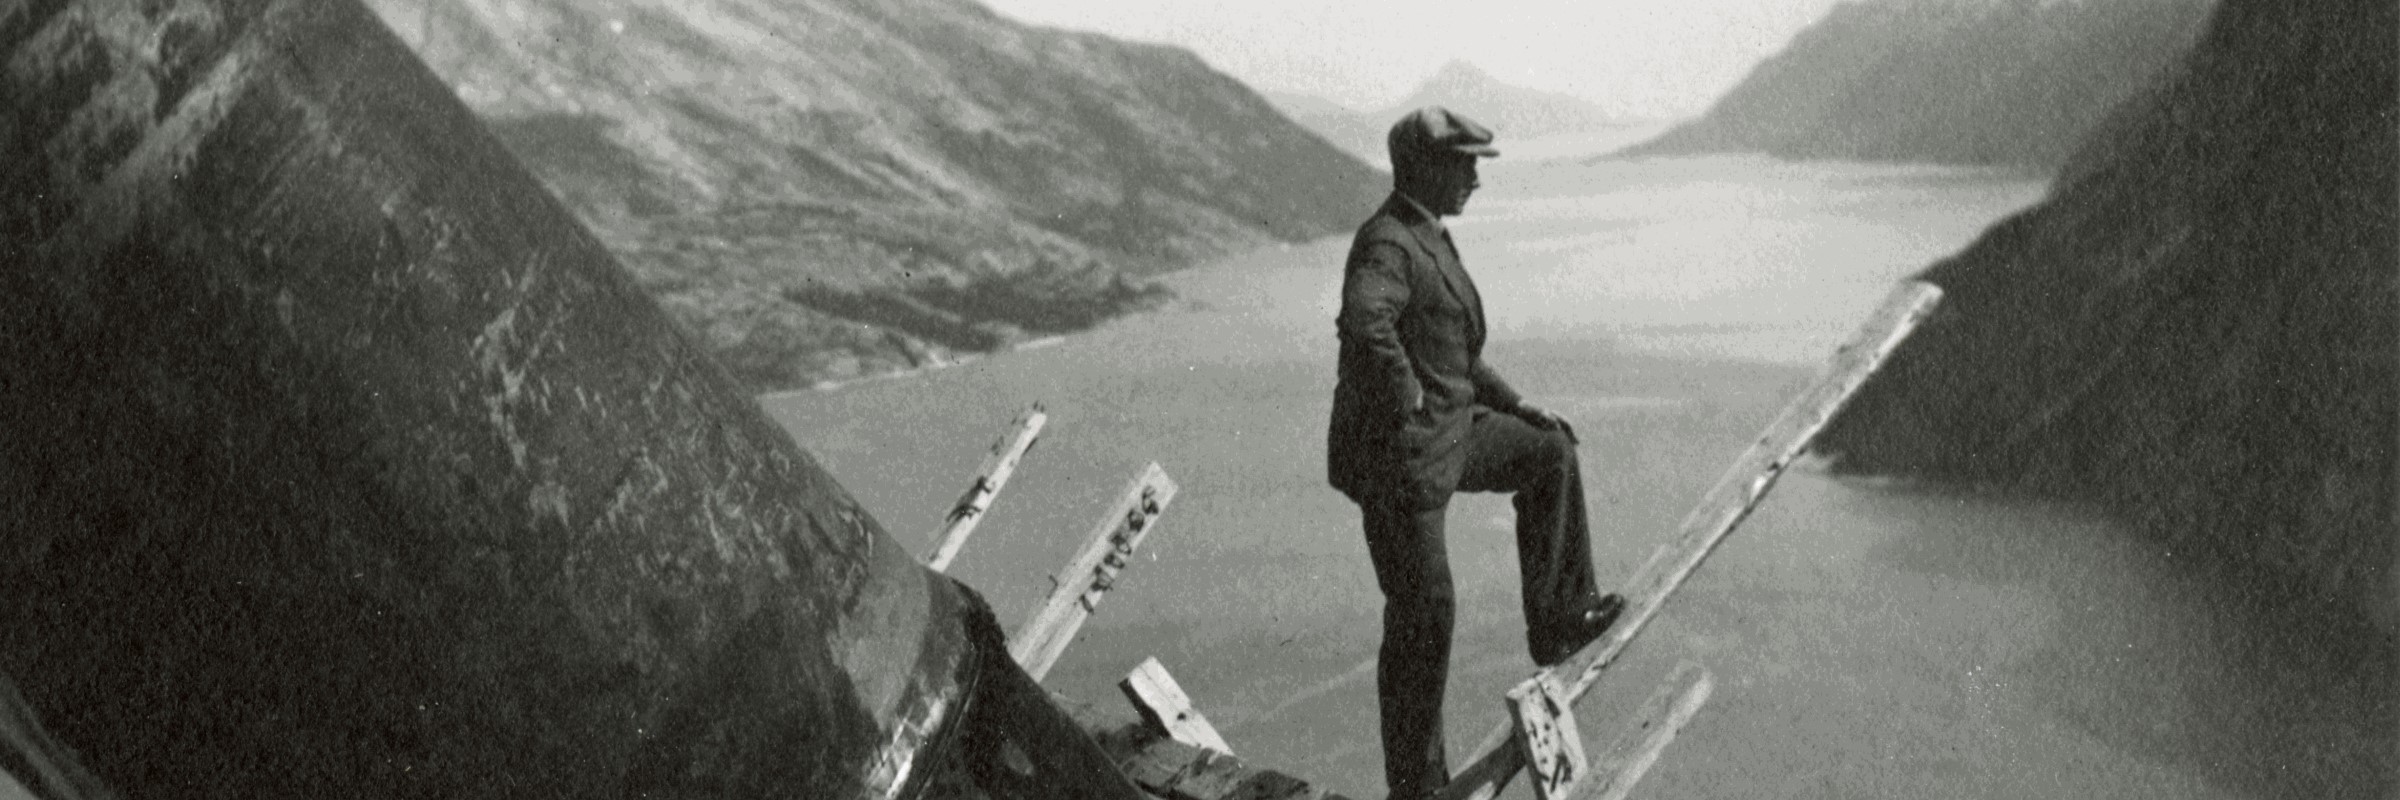 Black and white image of man looking out over a fjord